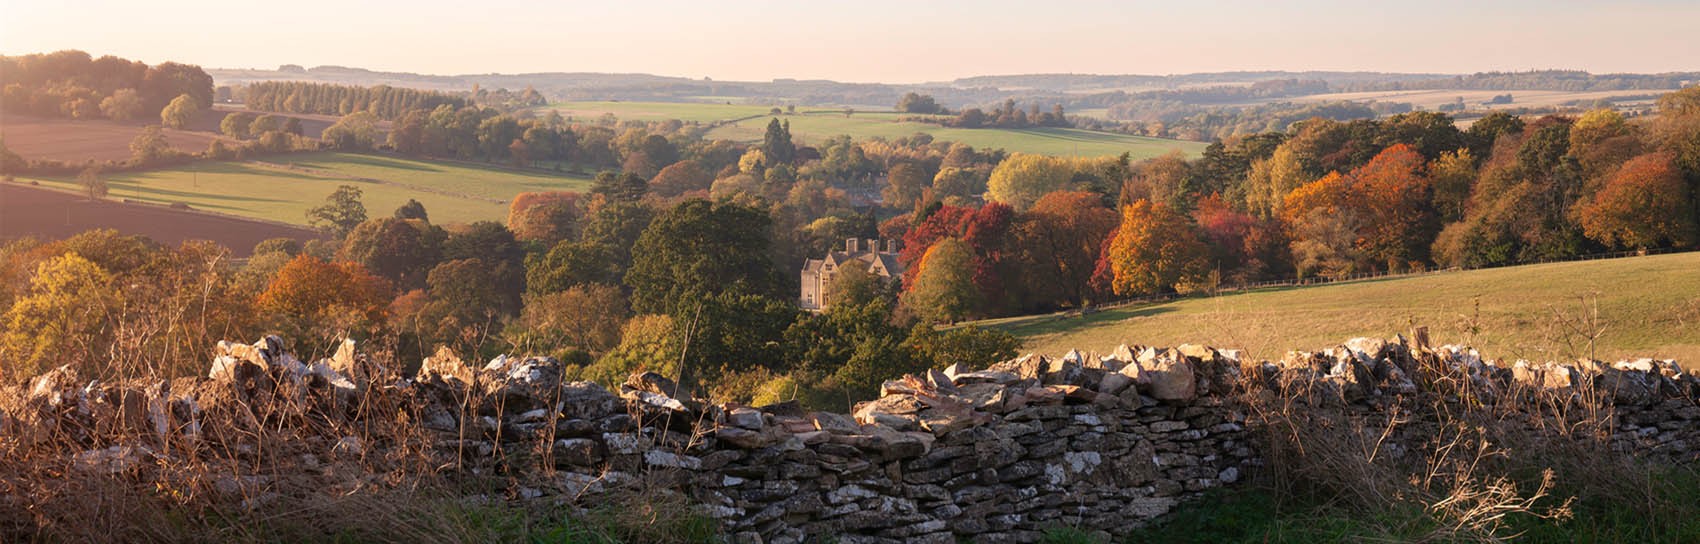 View towards Abbotswood Estate from Stow on the Wold. Photograph by ANDREW ROLAND